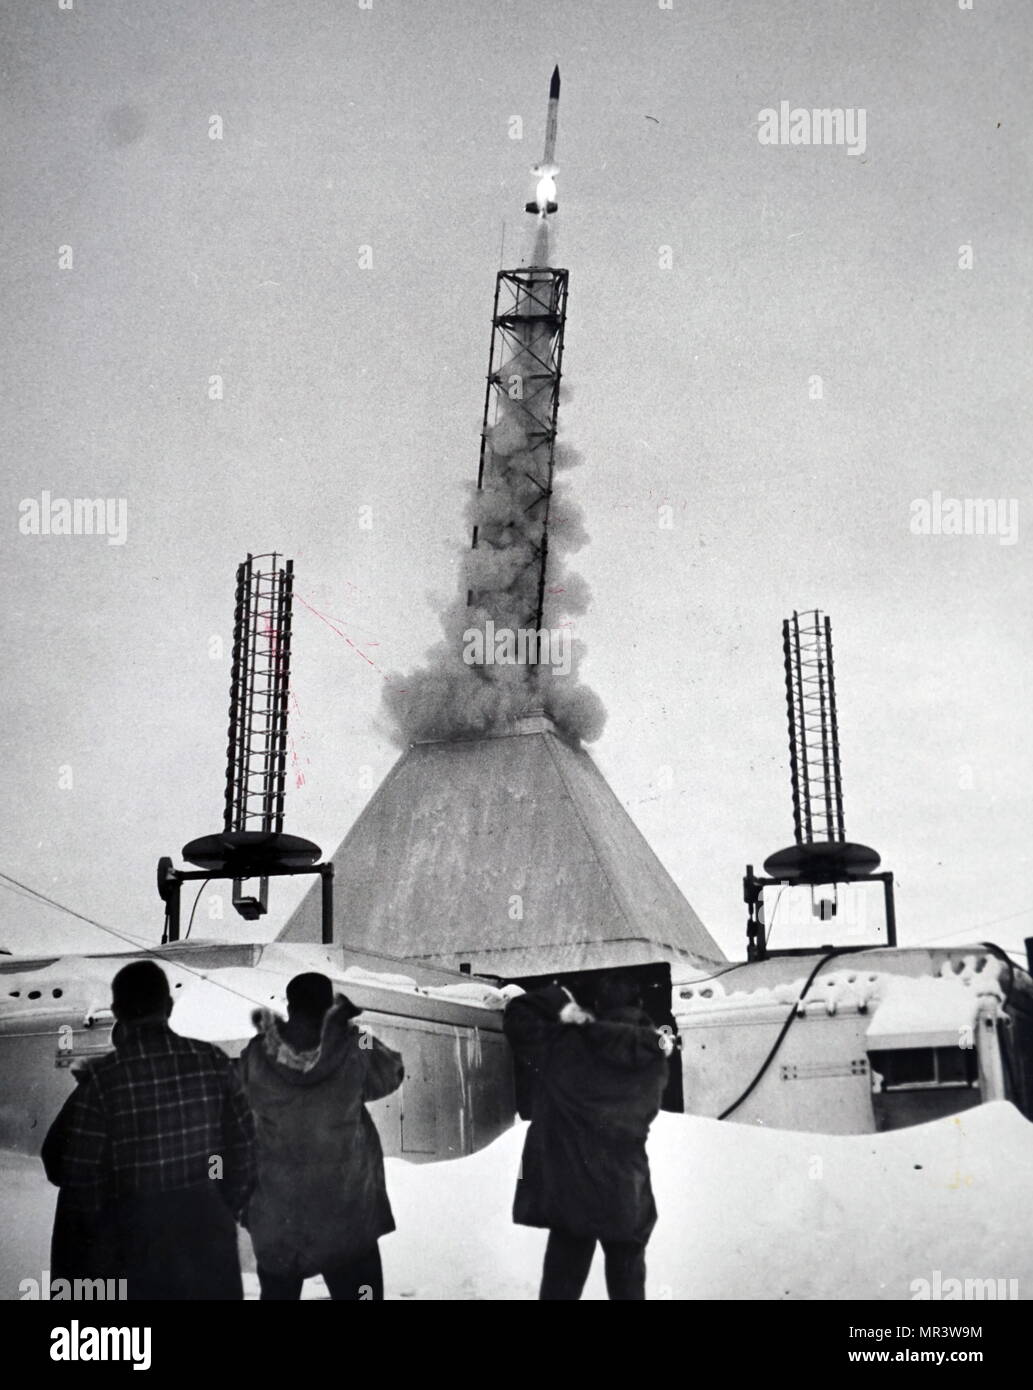 Photograph taken during the launch of the Aerobee rocket, a small unguided suborbital sounding rocket used for high atmospheric and cosmic radiation research in the United States. Dated 20th century Stock Photo